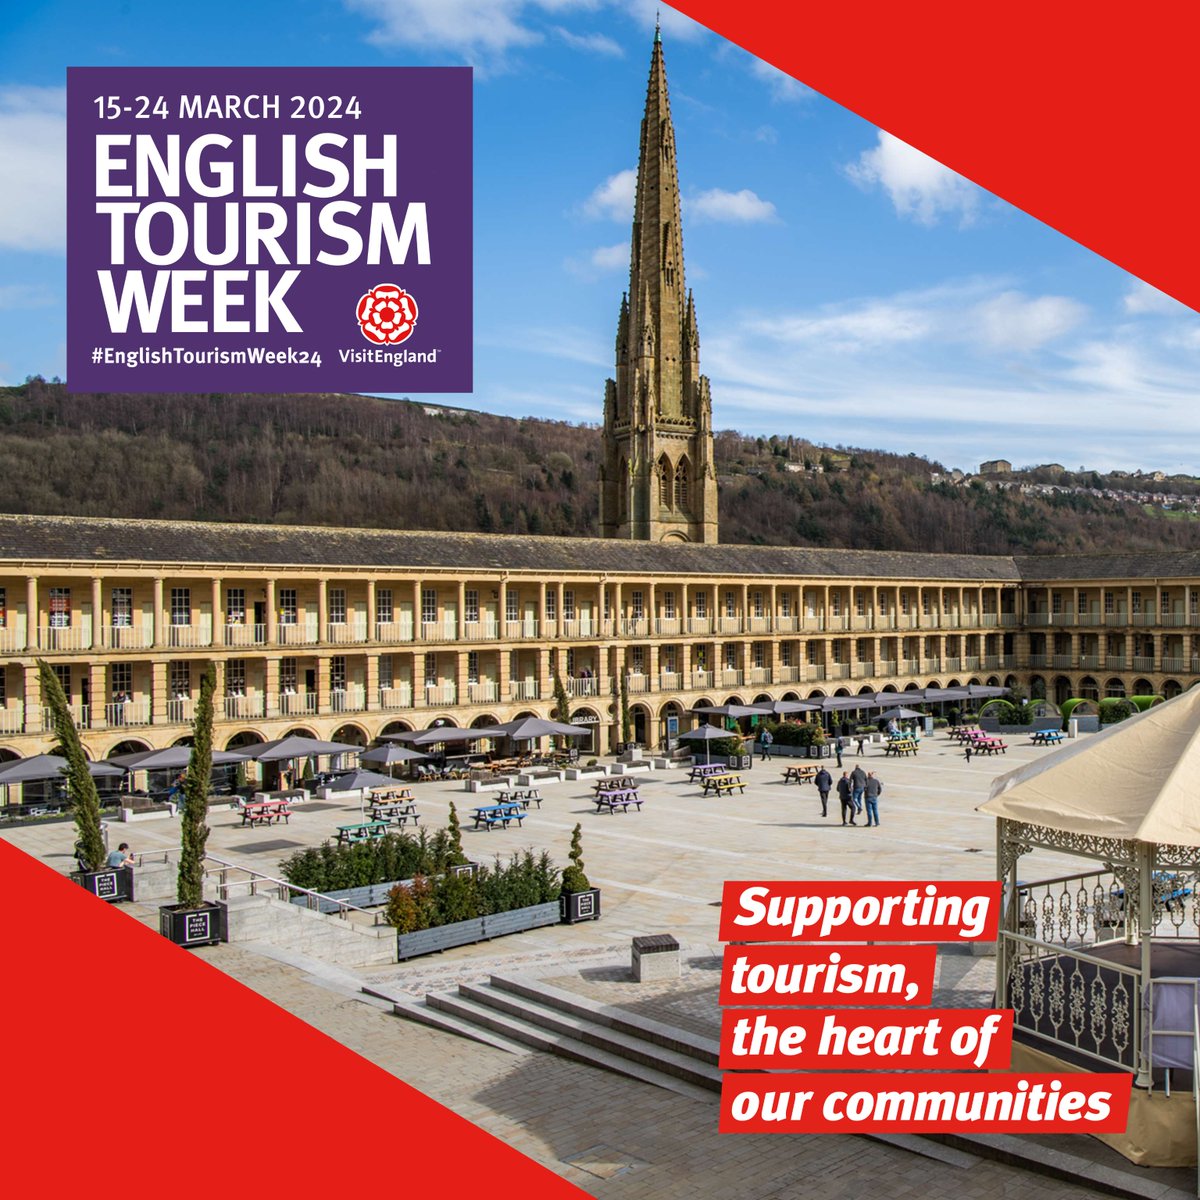 It's #EnglishTourismWeek24 and we're proud The Piece Hall embodies the social, cultural & economic value of tourism! 🏛 From music gigs to restaurants and indie retailers, this magnificent building is a must-visit! Share your favourite photos and memories in the comments! 📸